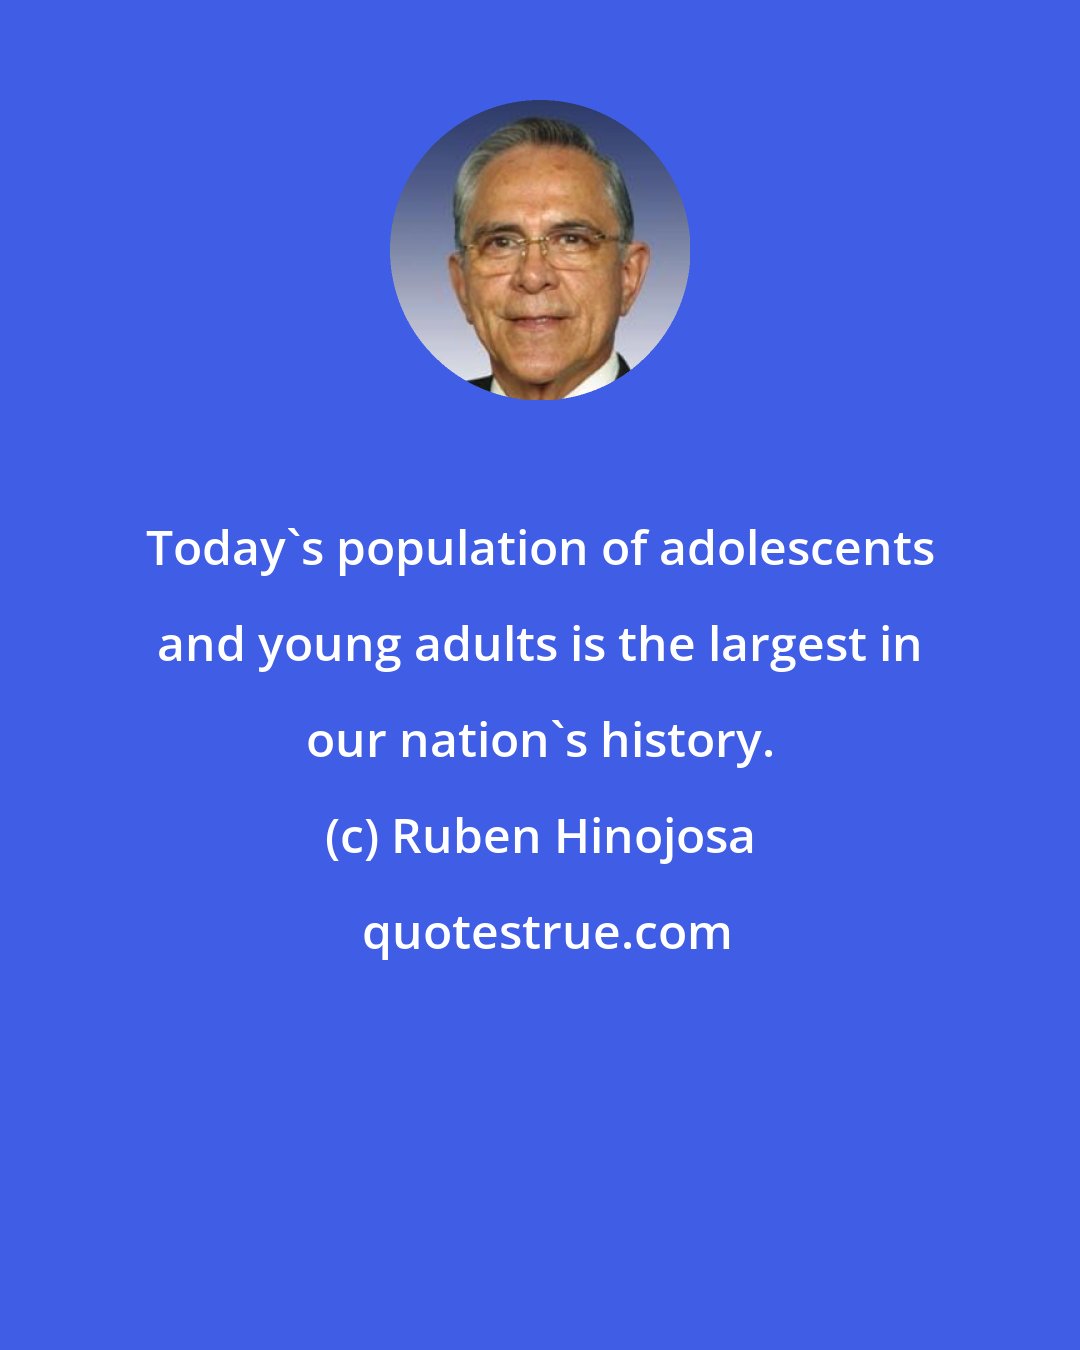 Ruben Hinojosa: Today's population of adolescents and young adults is the largest in our nation's history.